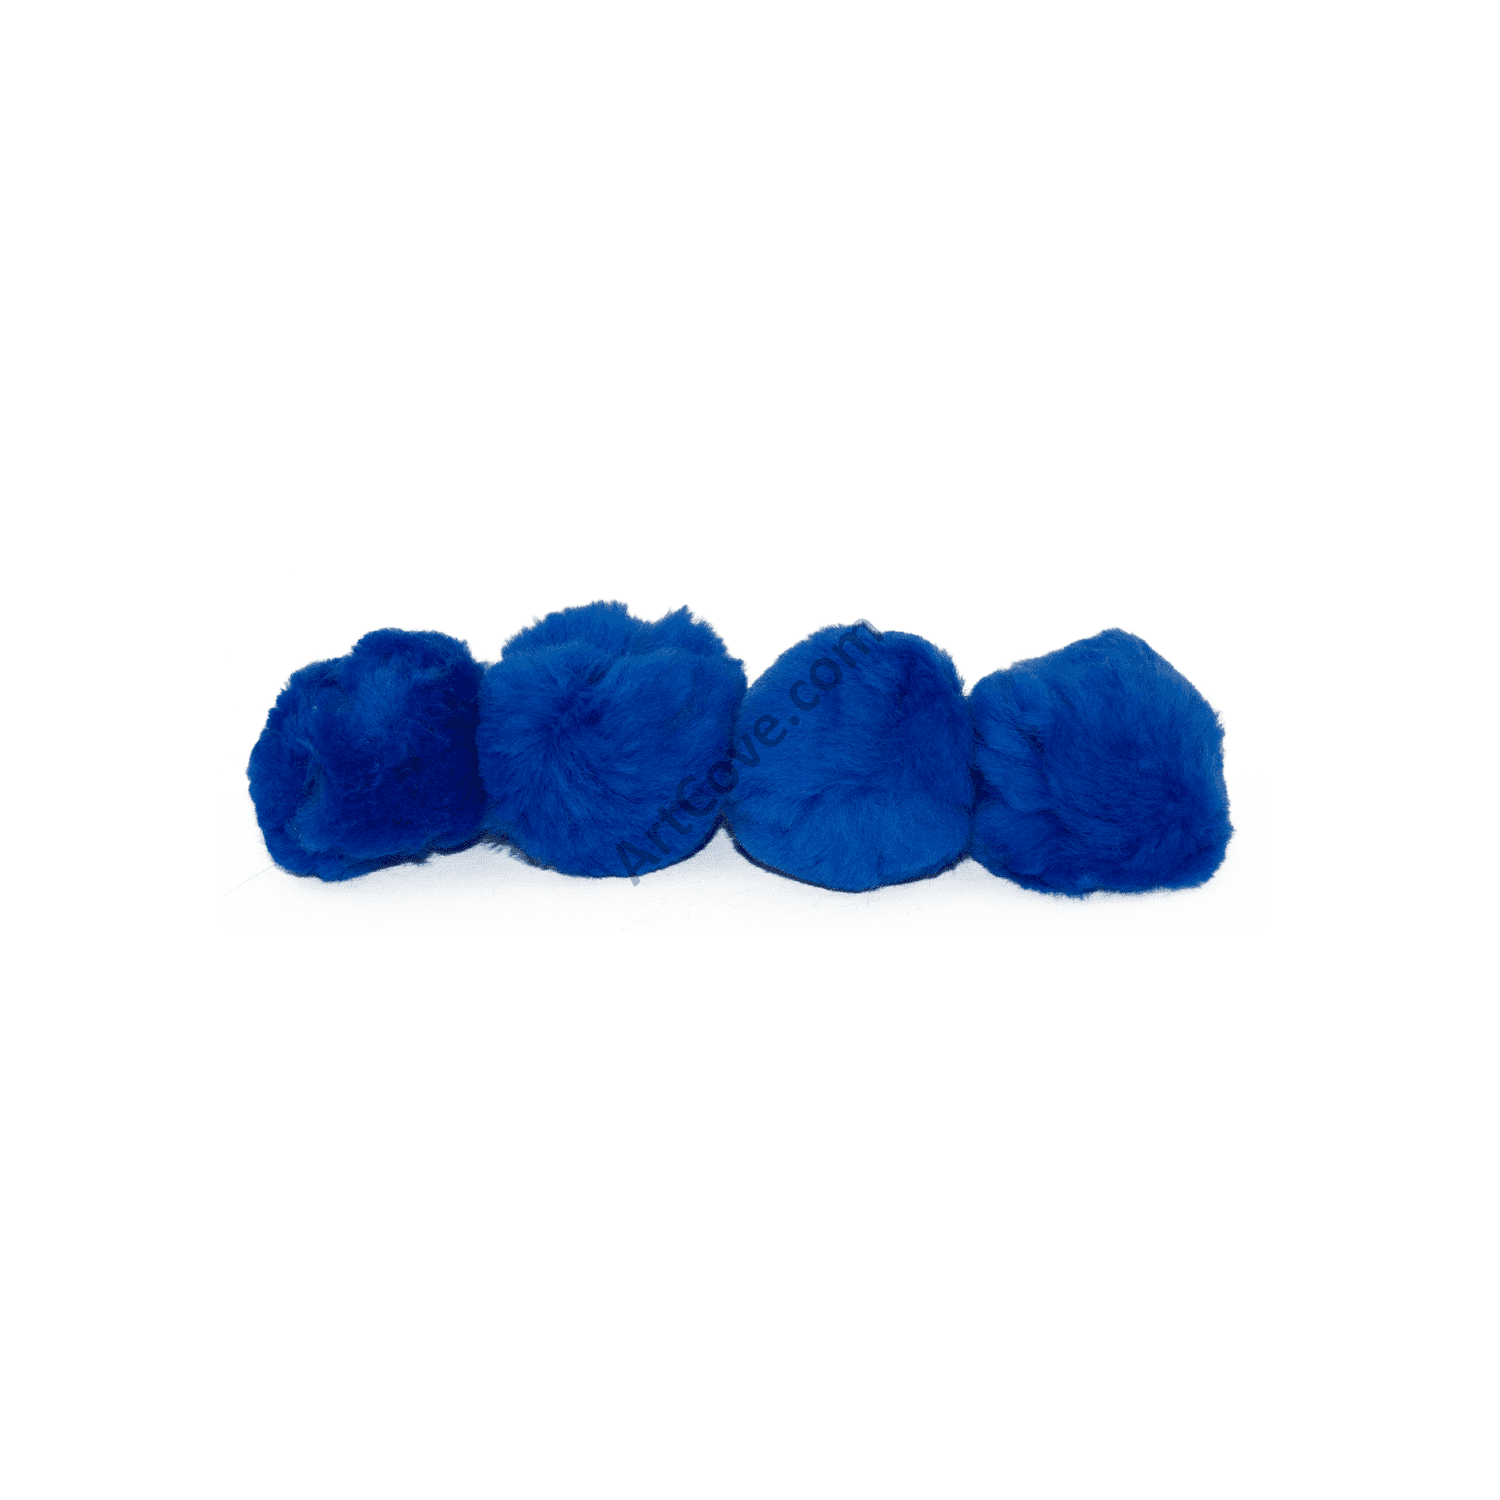 24 Packs: 100 Ct. (2,400 Total) 1/2 inch Mixed Blue Pom Poms by Creatology